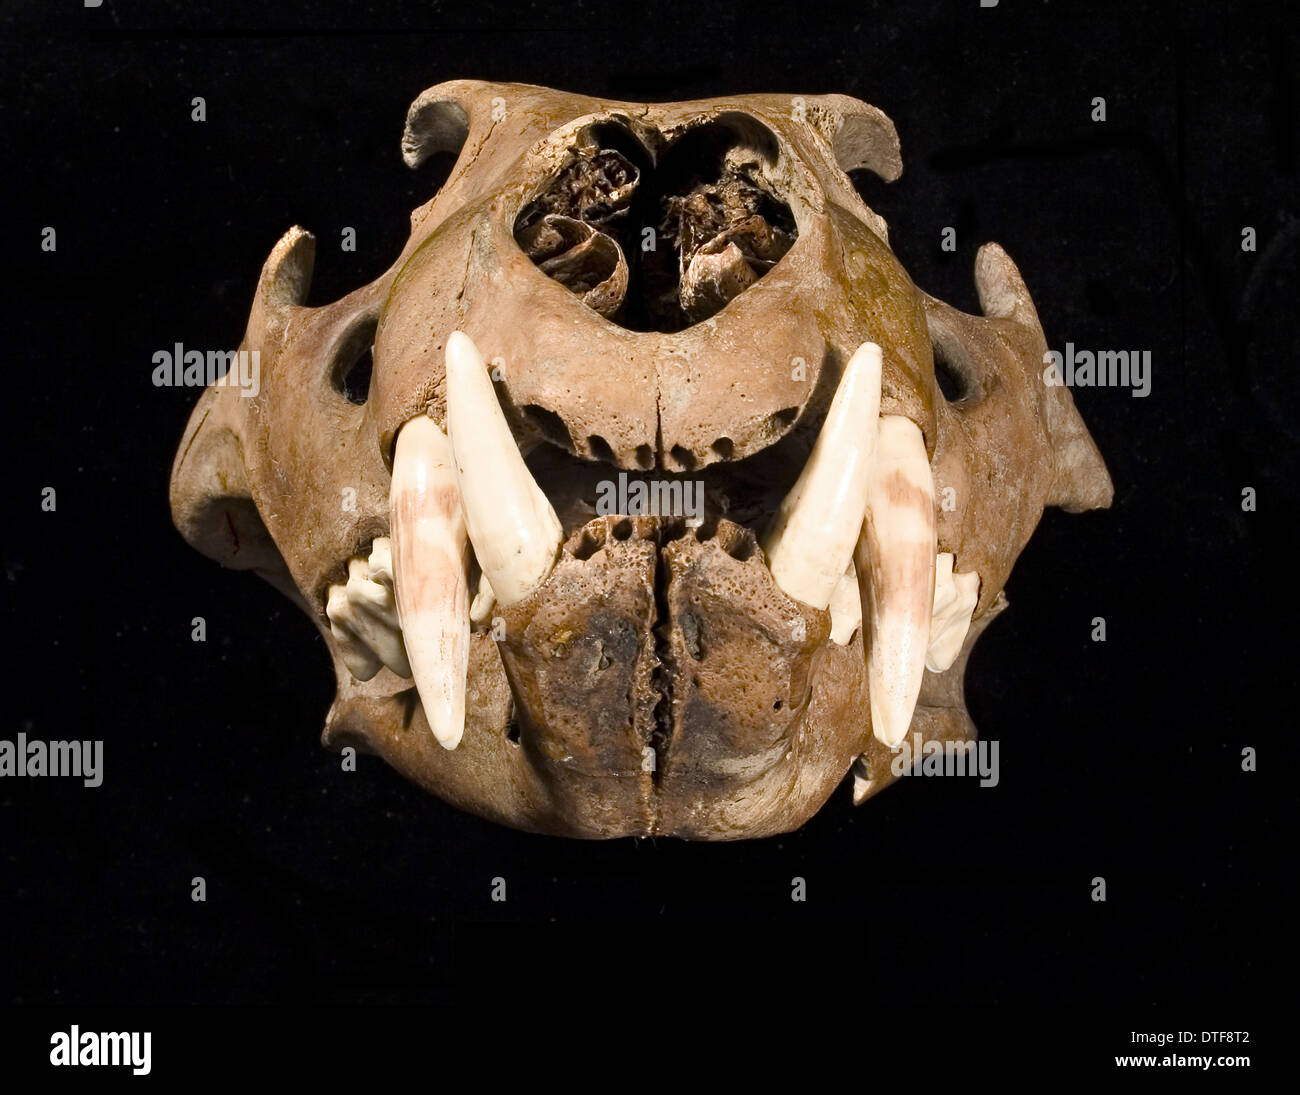 Lion skull with lower jaw viewed from right side Stock Photo